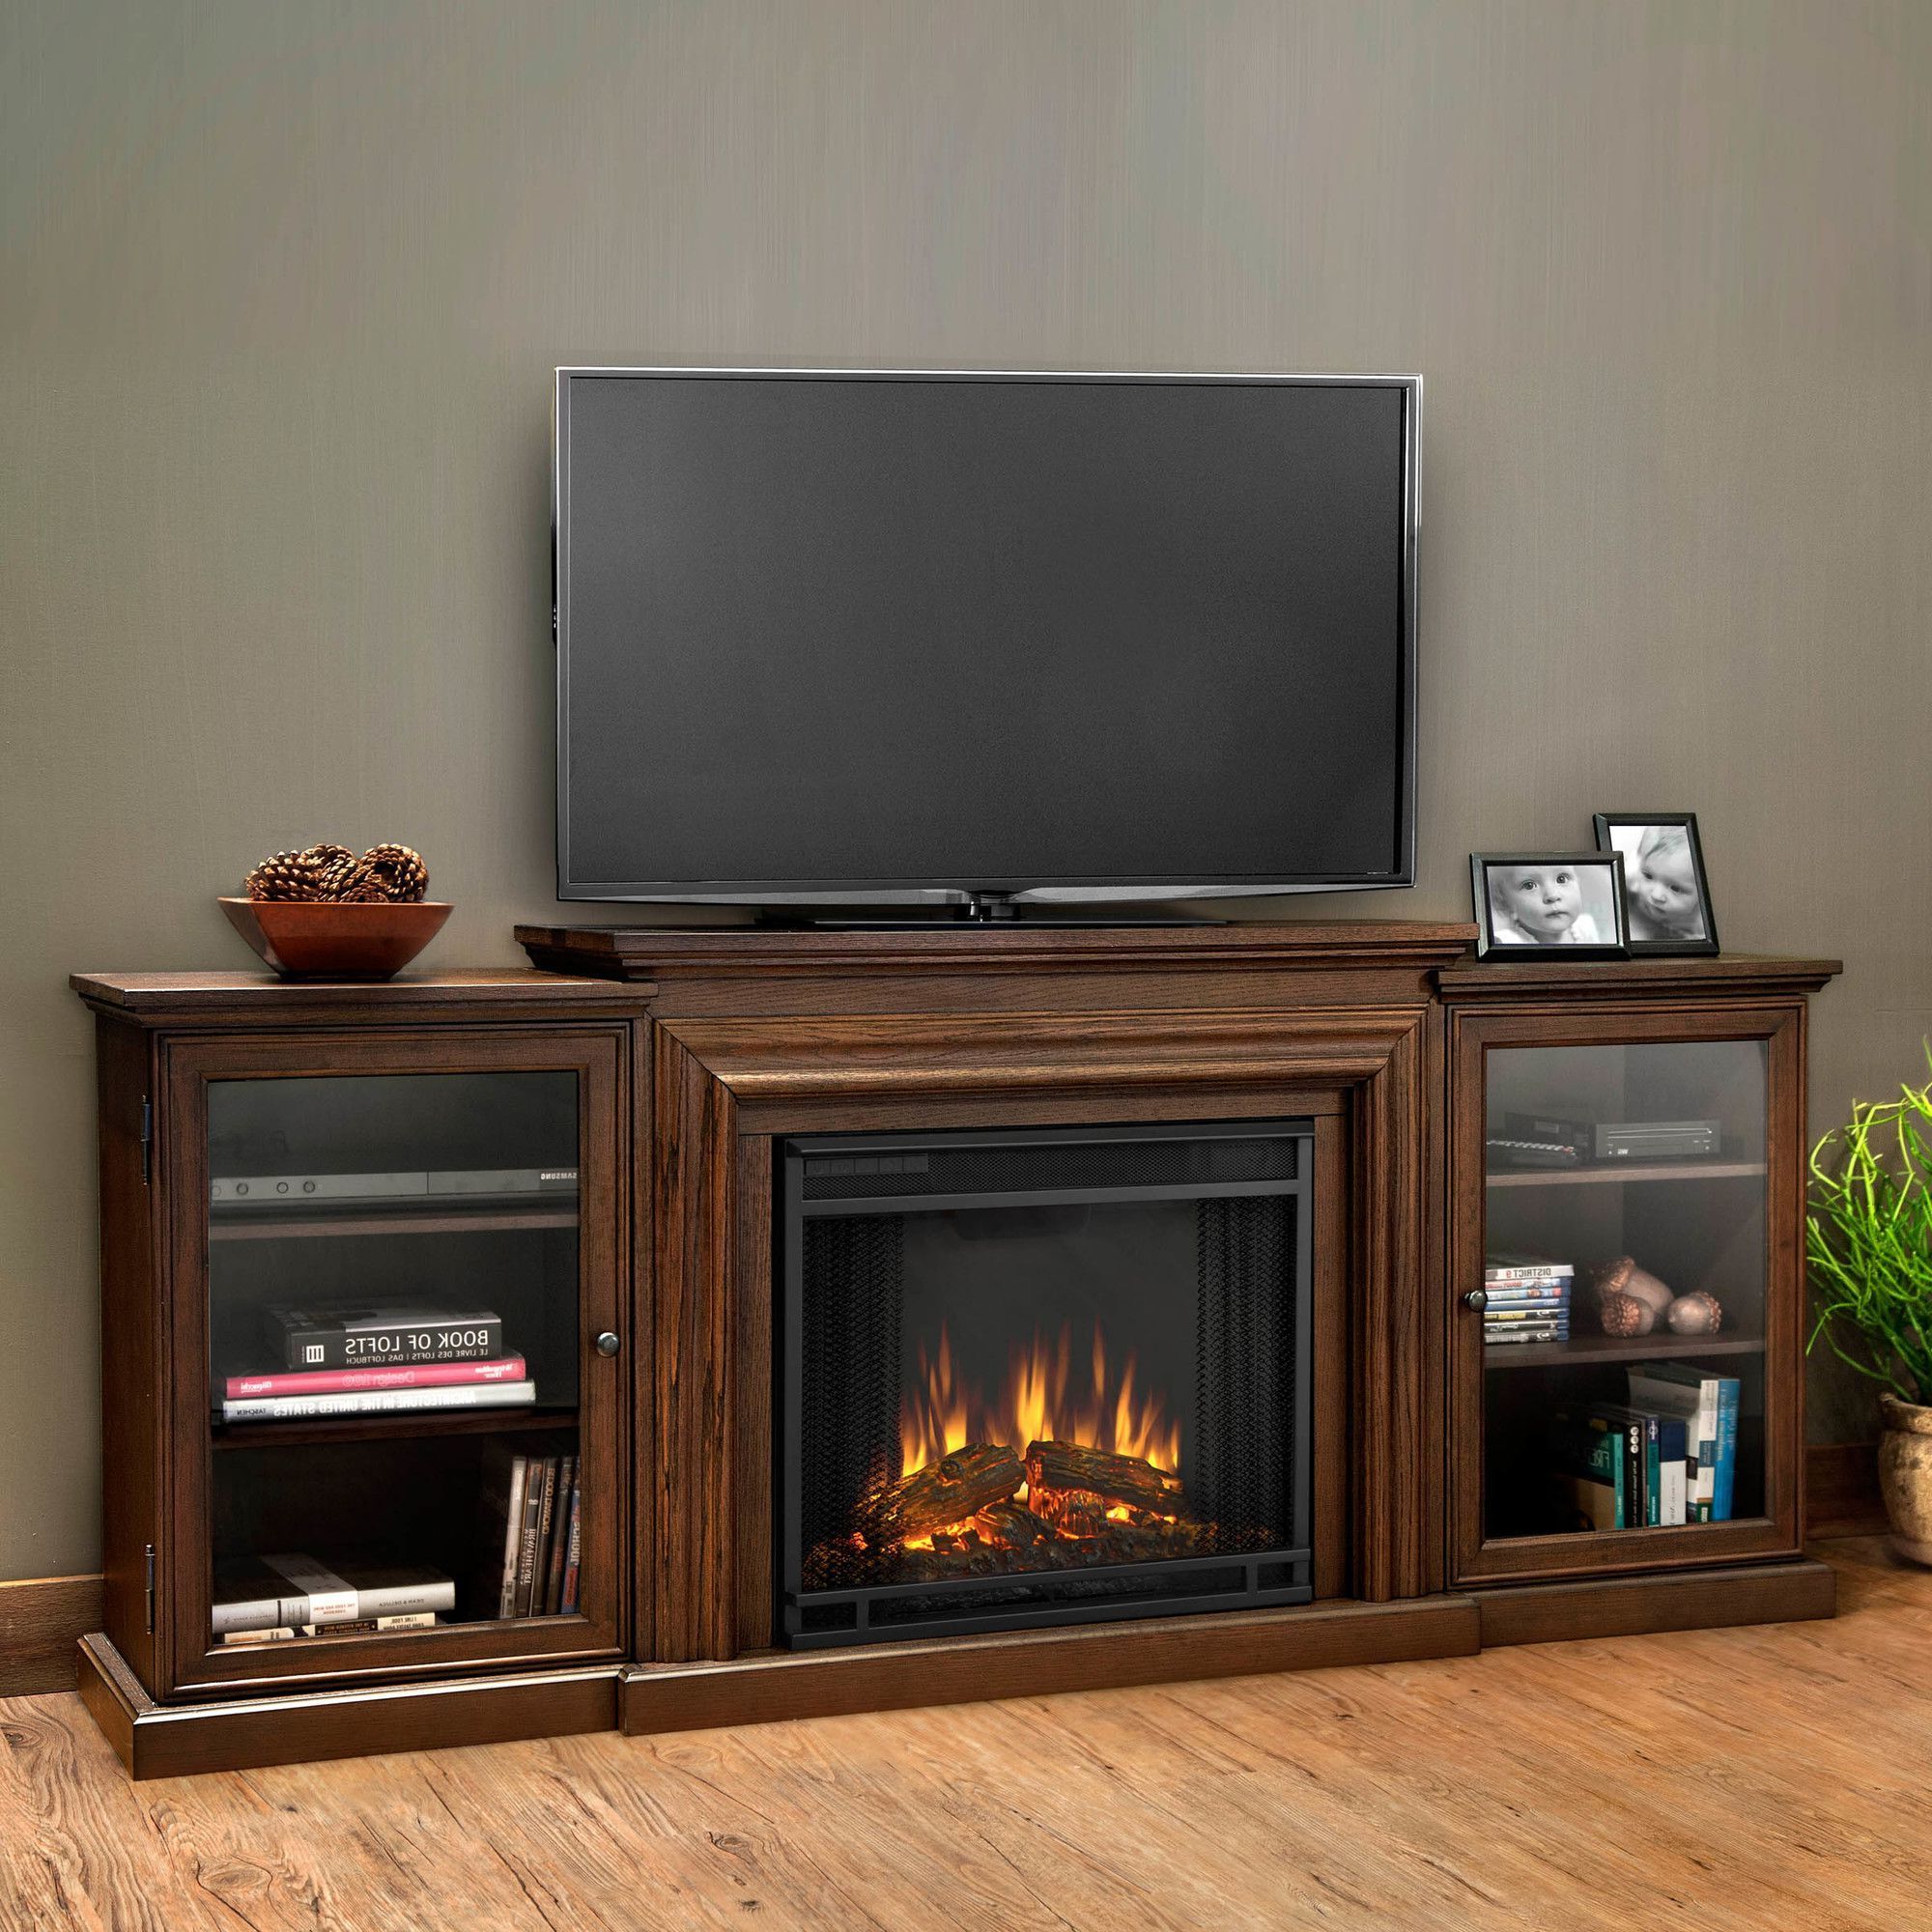 Neilsen Tv Stands For Tvs Up To 50" With Fireplace Included Intended For Most Recent Frederick Tv Stand For Tvs Up To 78" With Fireplace (View 22 of 25)